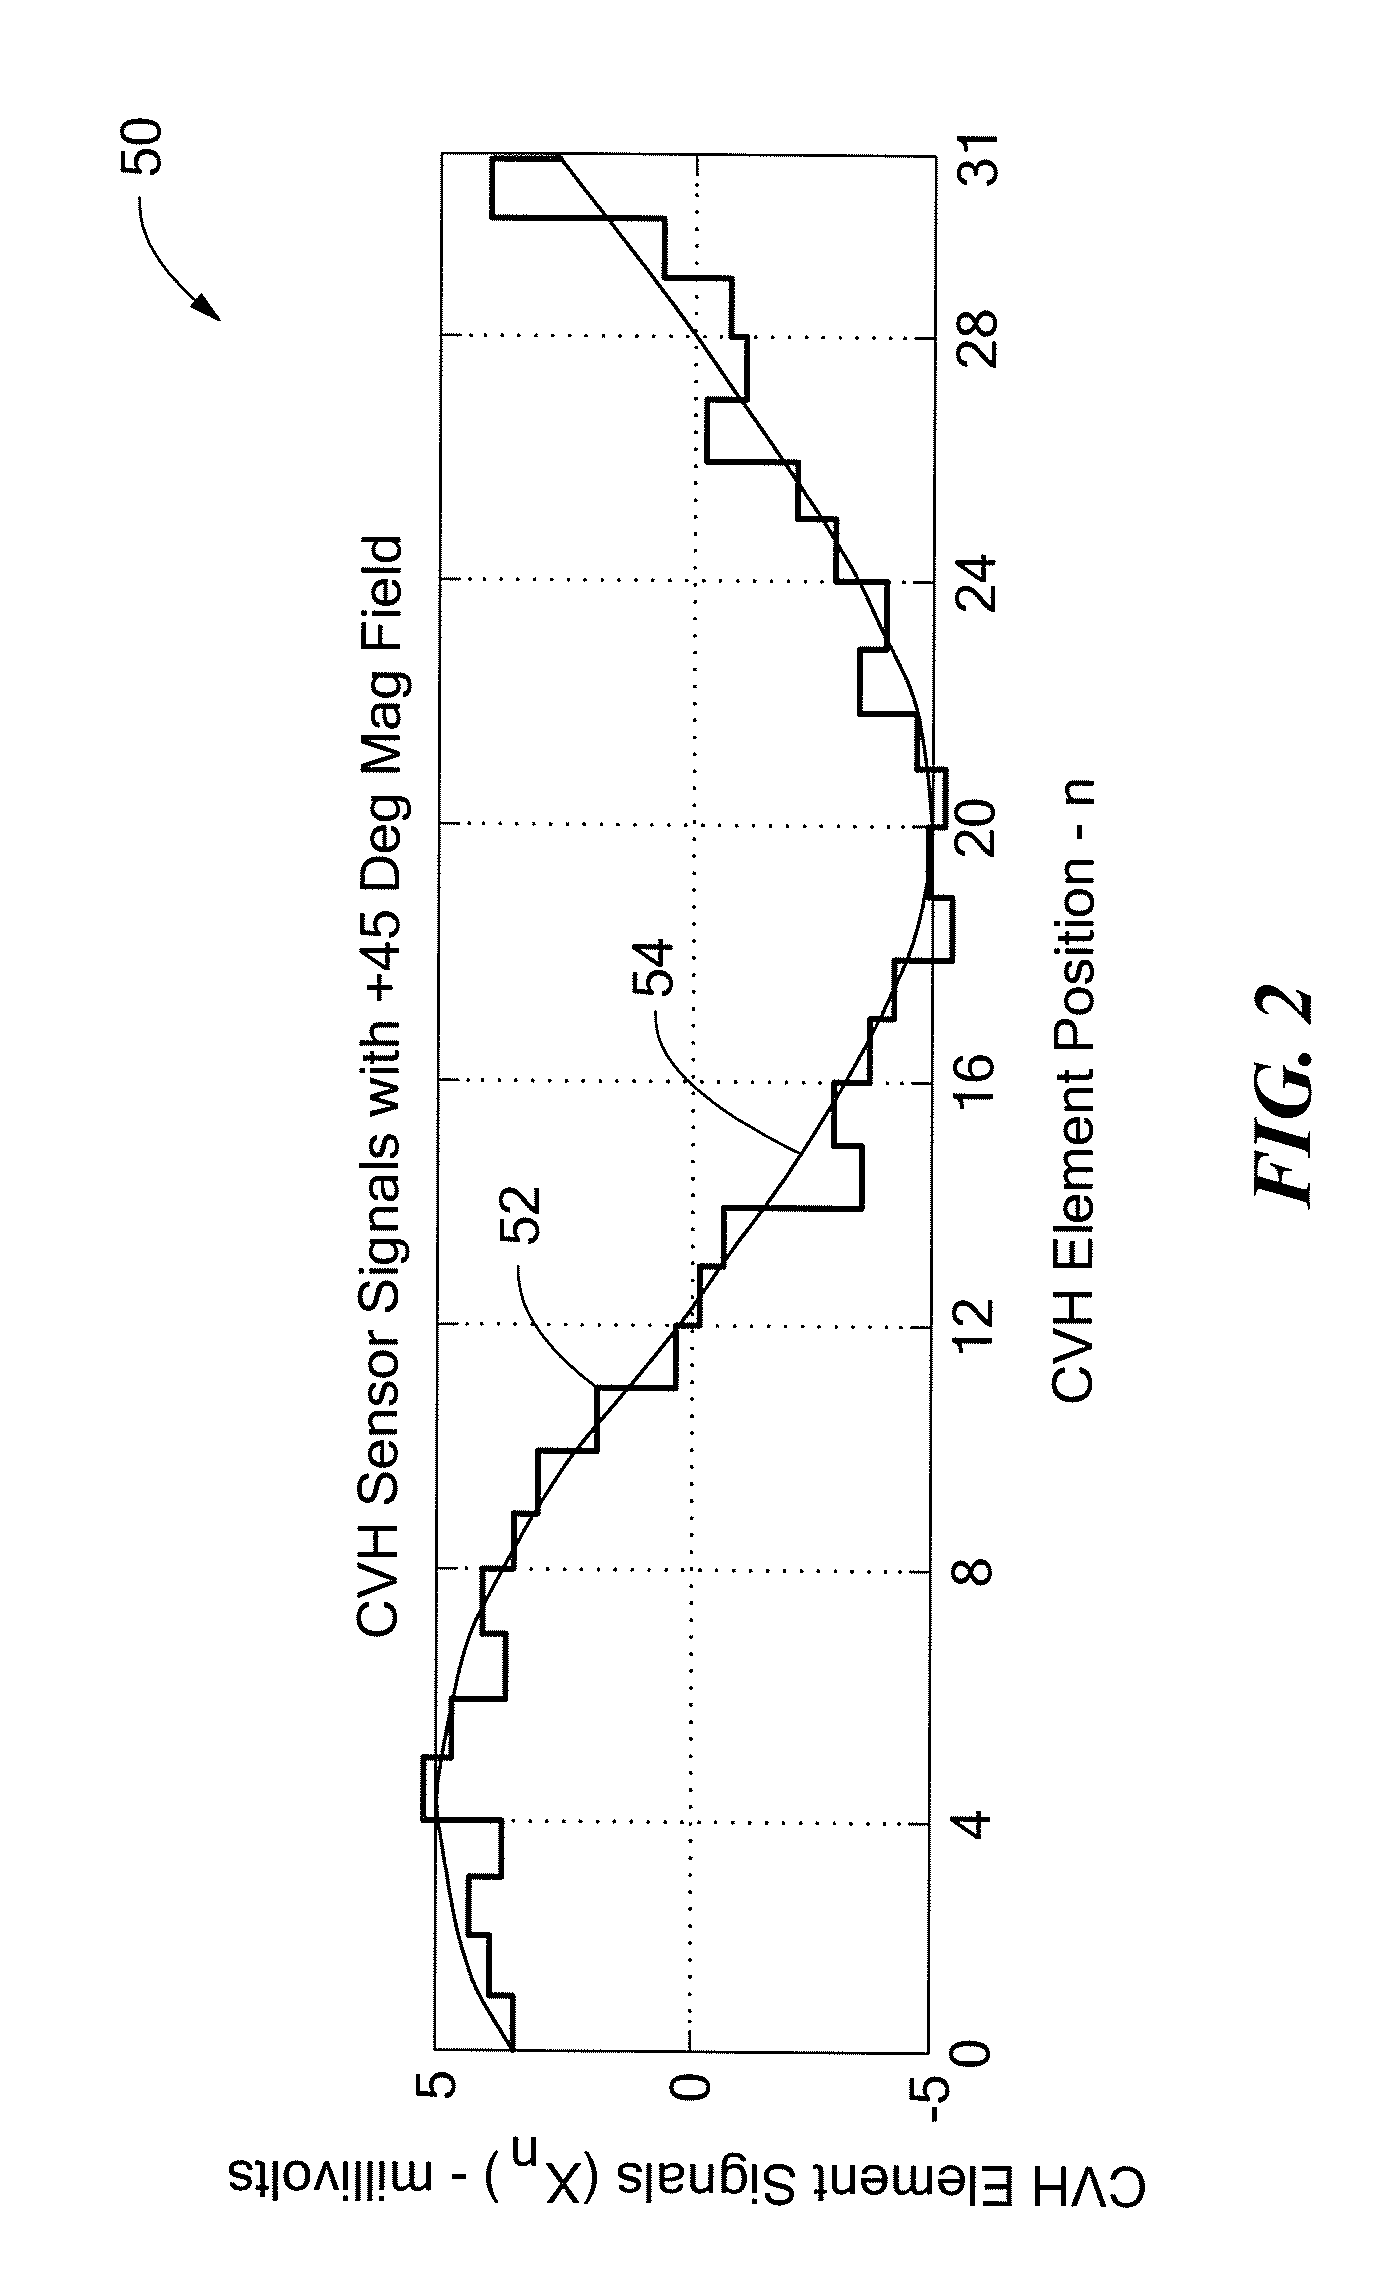 Circuit and method for processing signals generated by a plurality of sensors